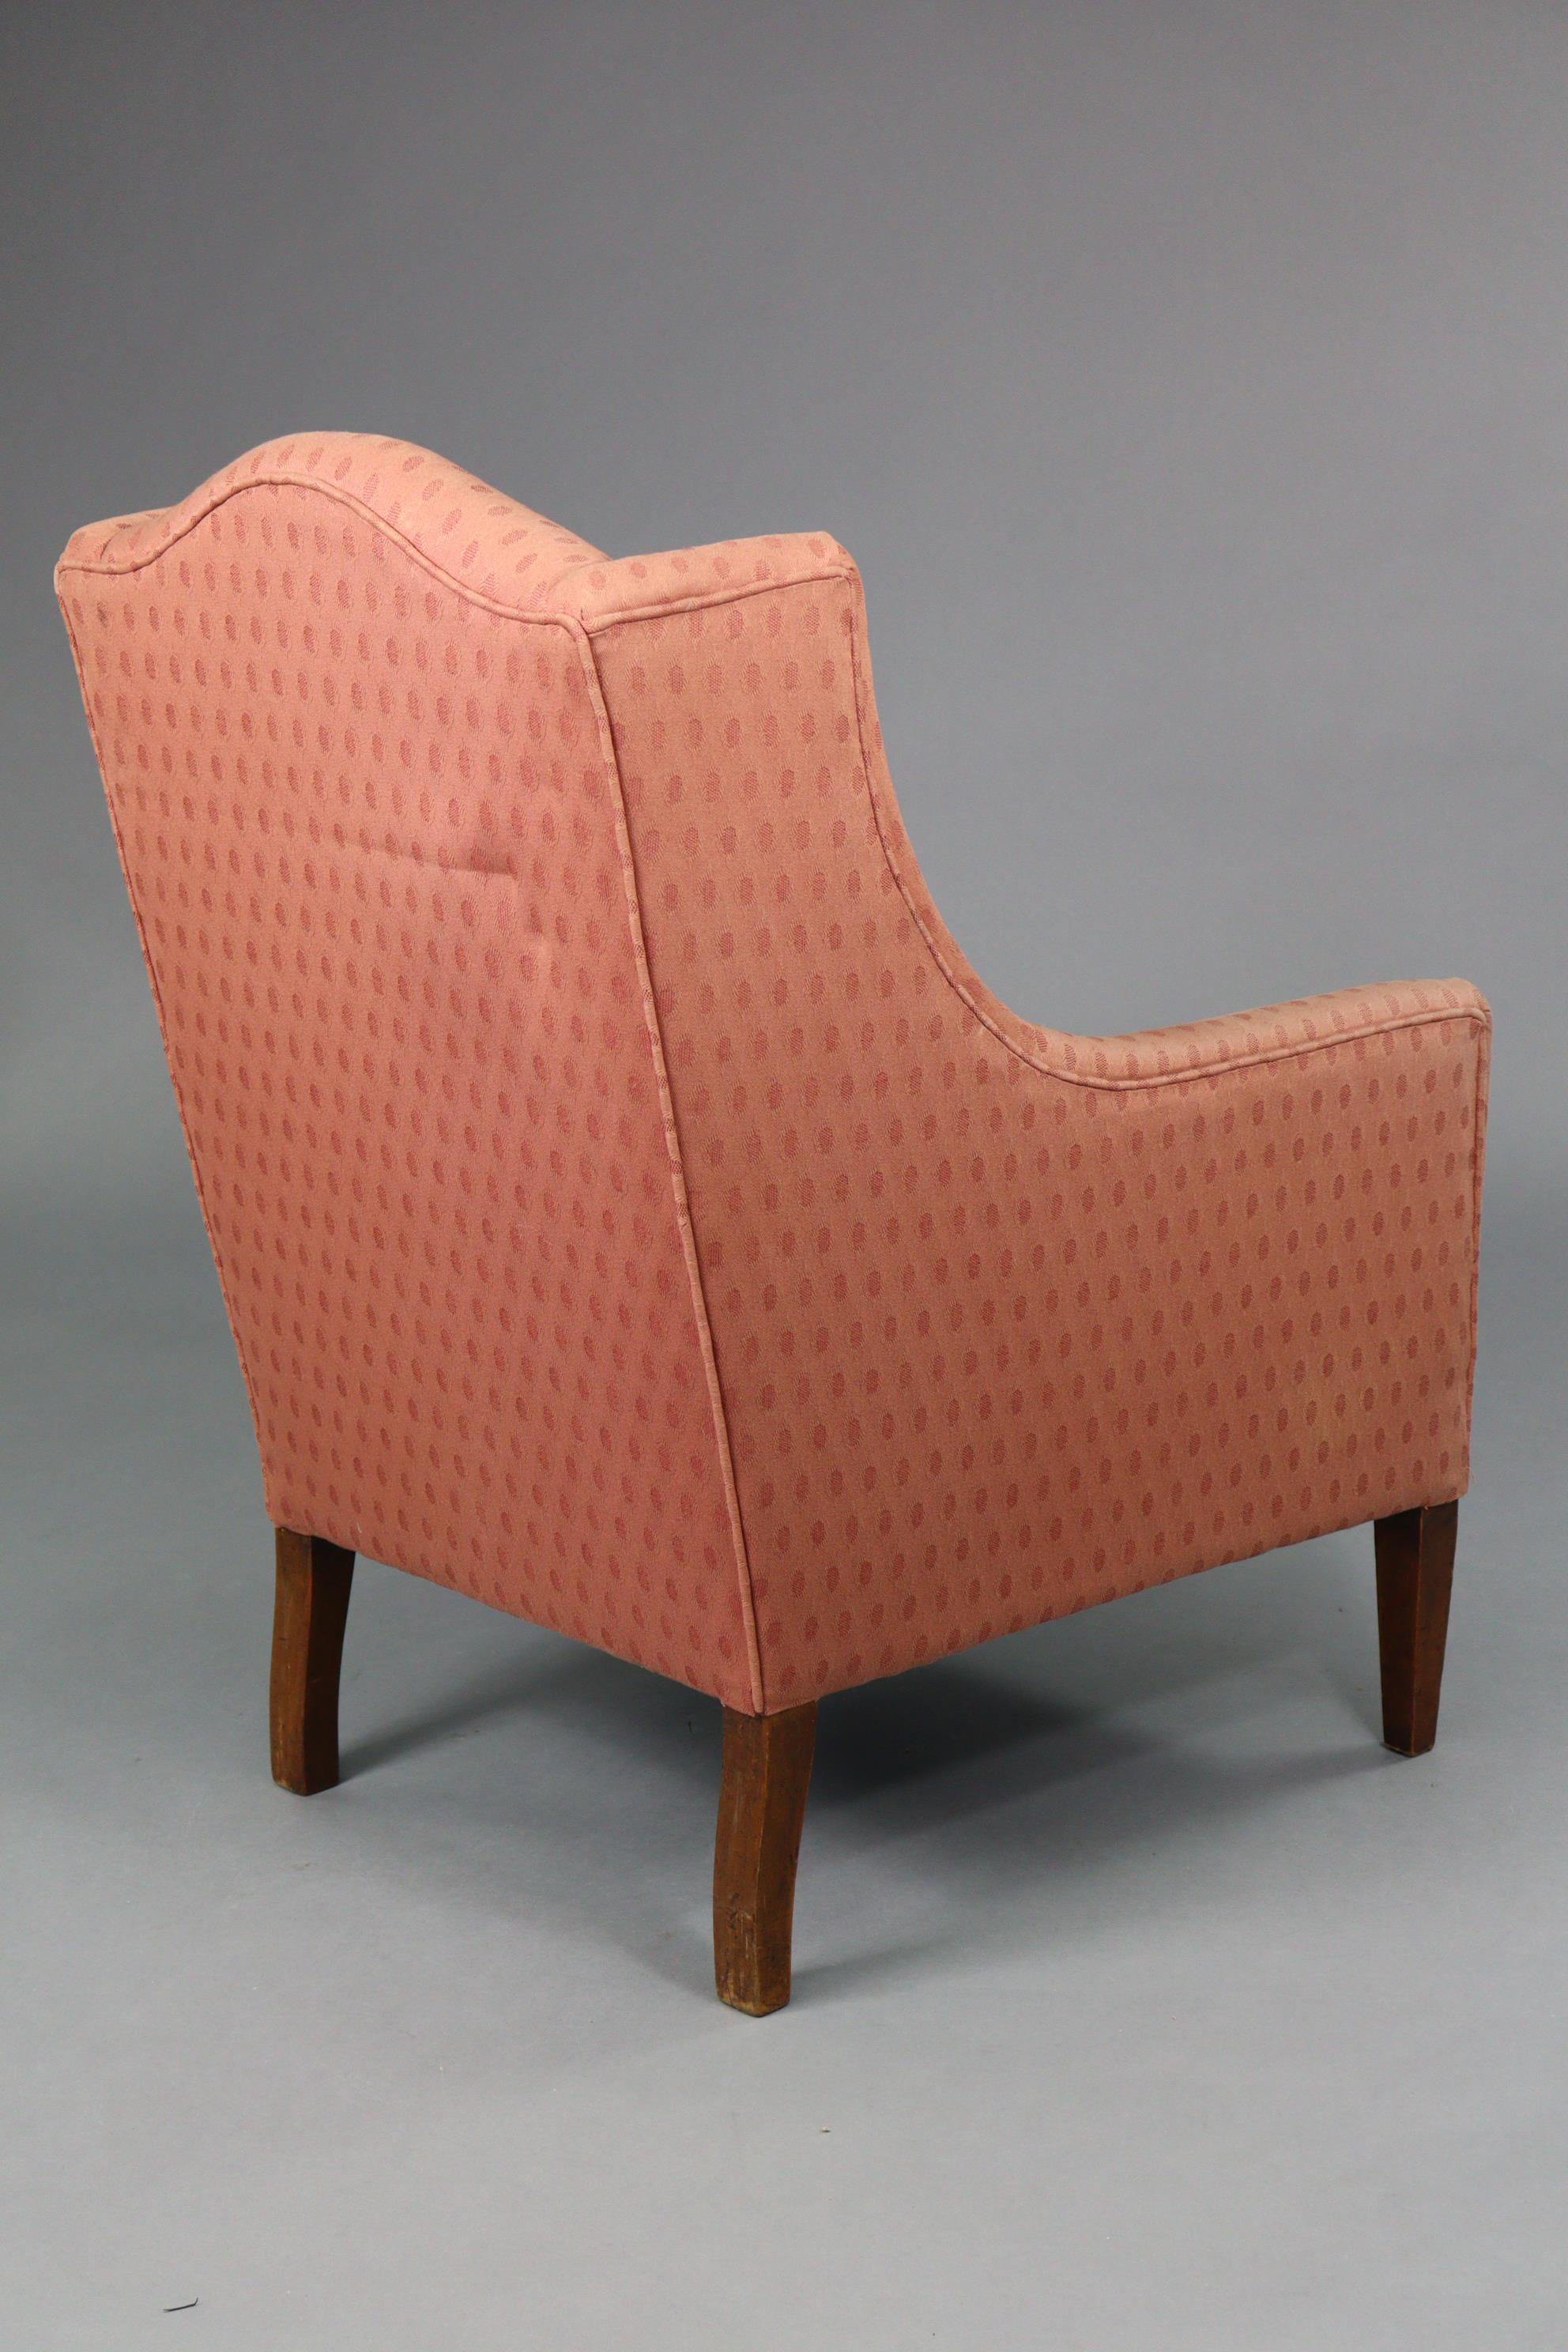 An Edwardian armchair with rounded back & sprung seat upholstered pink geometric material, & on - Image 3 of 3